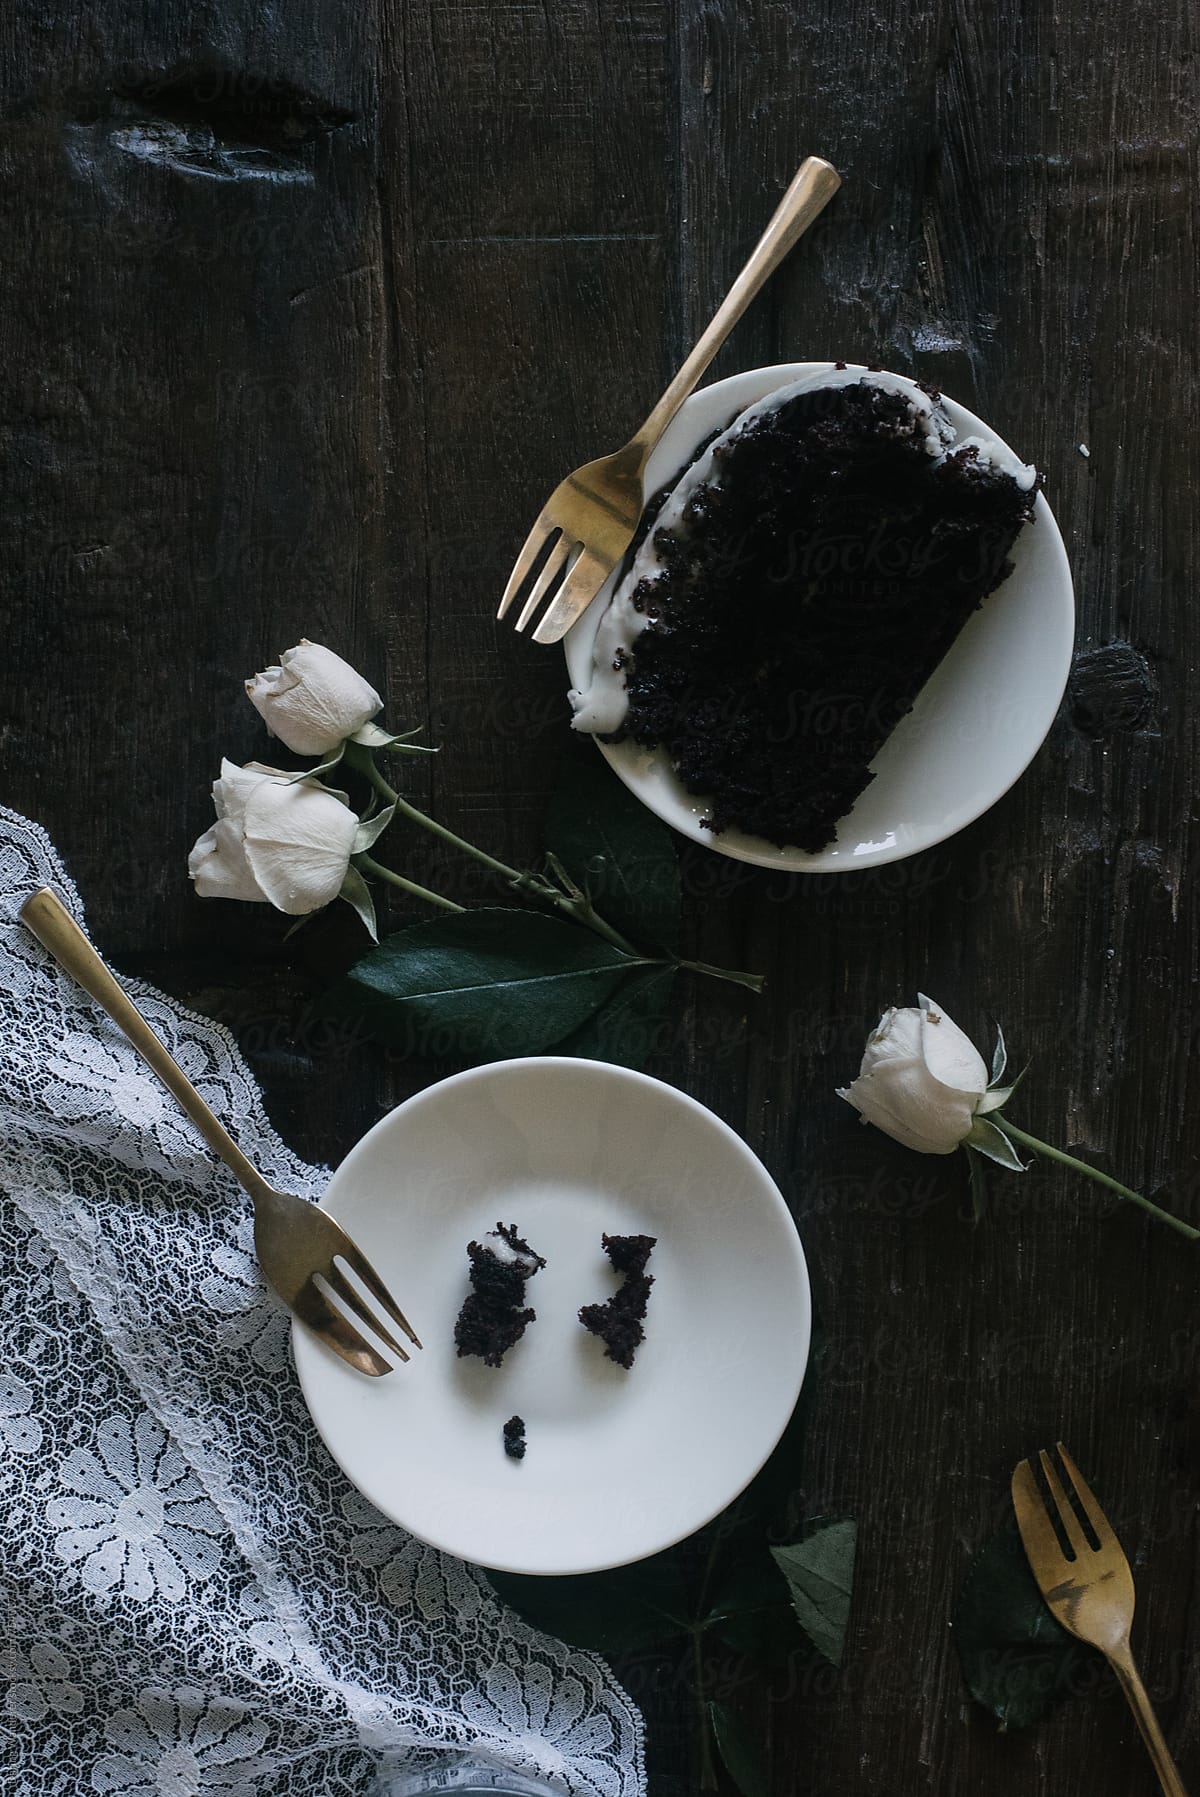 Slices of chocolate cake, white mini roses and glass of milk styled on lace and dark wood table